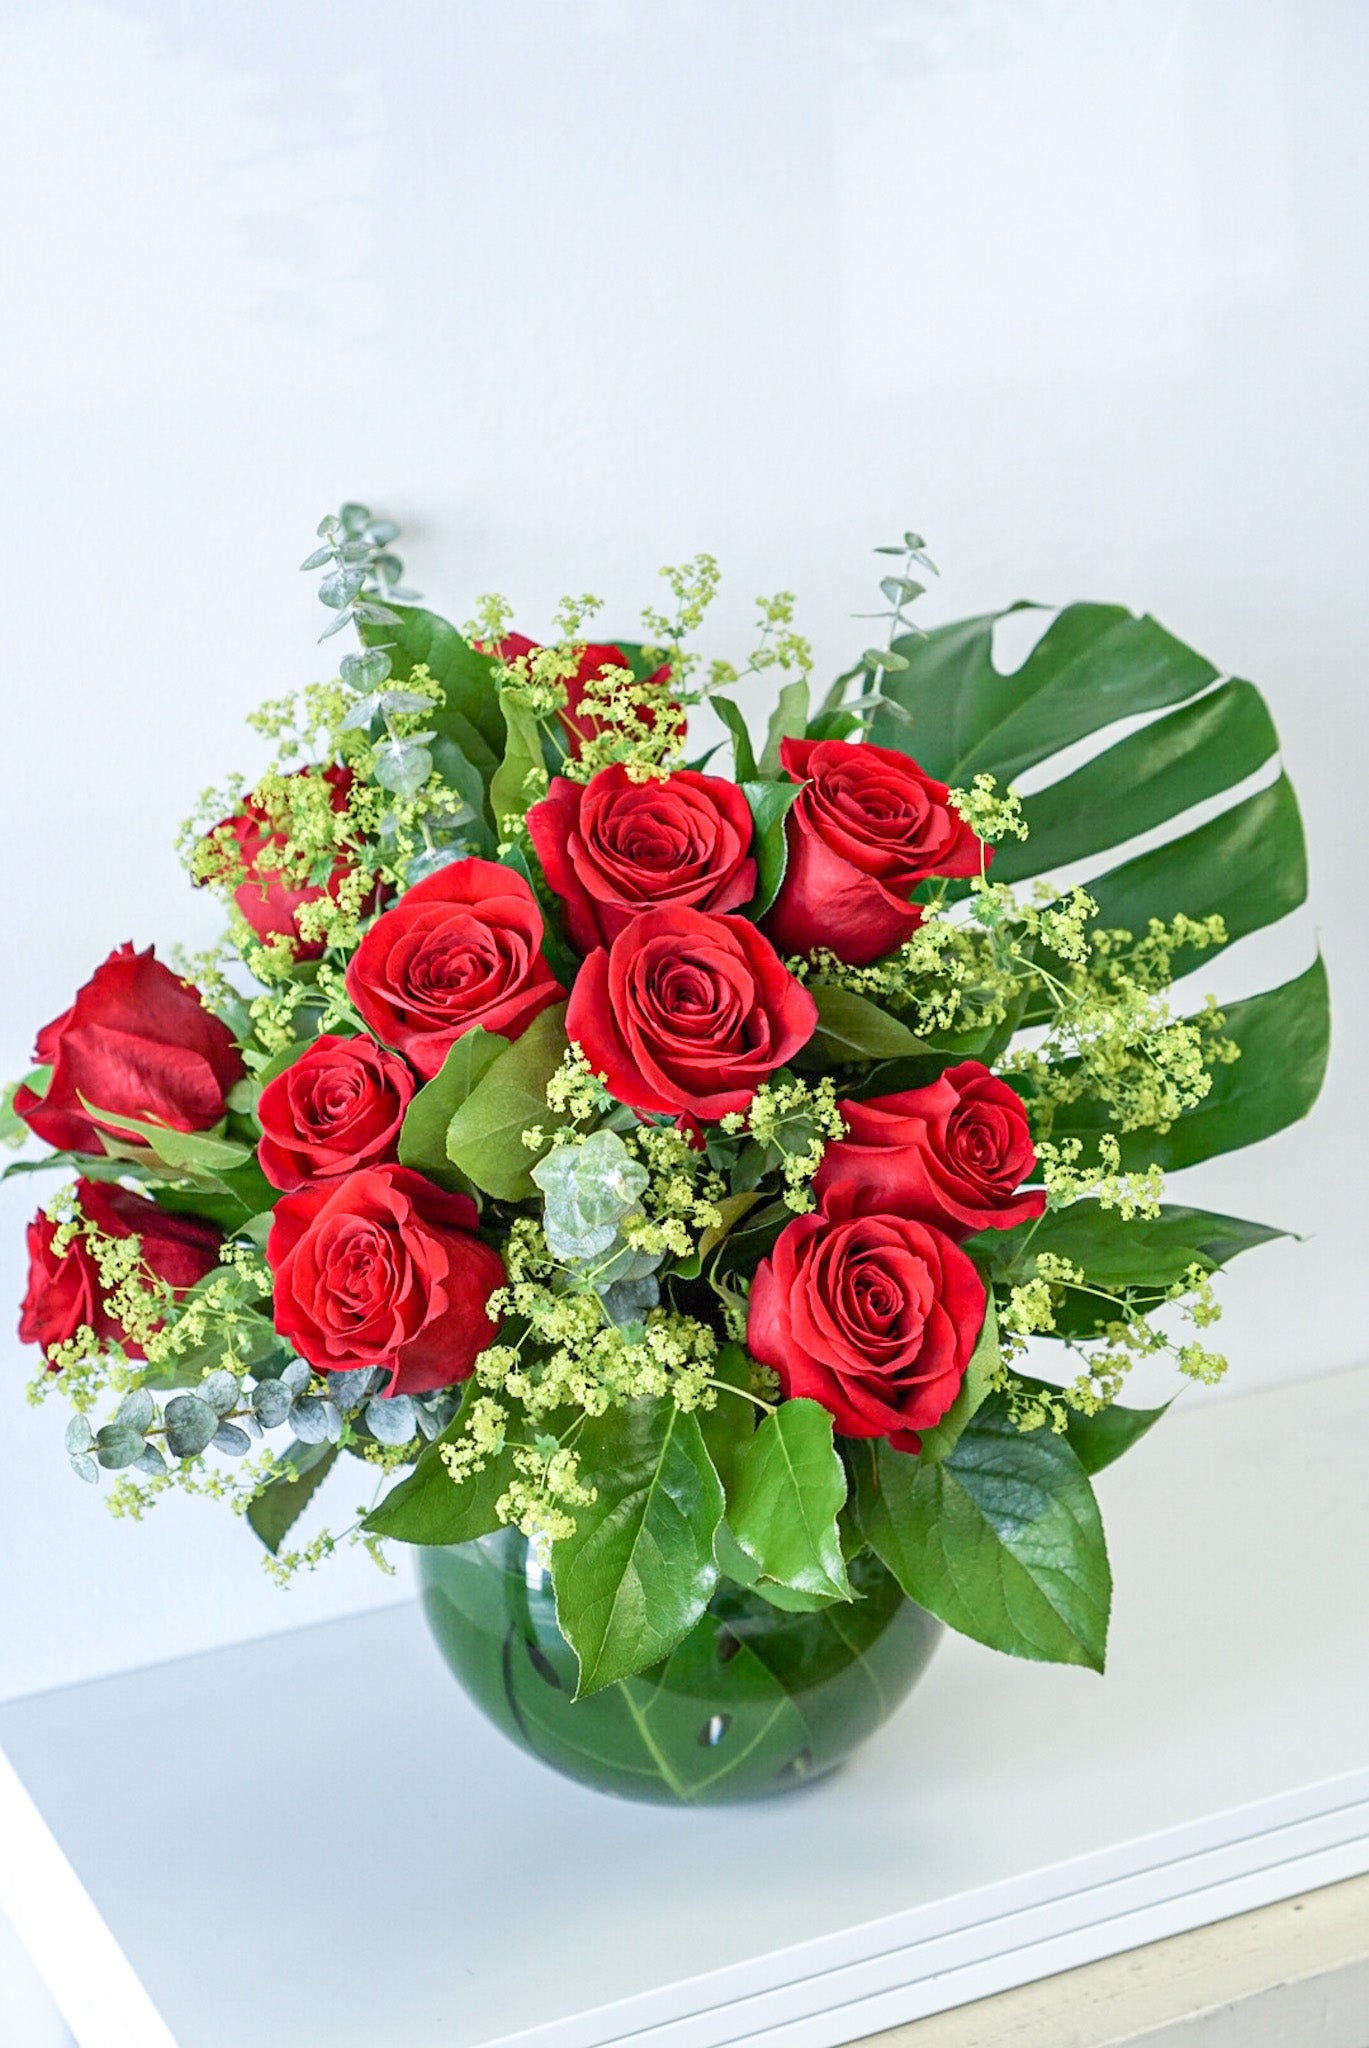 Sweetheart roses - A dozen of red roses and seasonal fillers in fish bowl vase. The Flower Nook - Toronto Florist